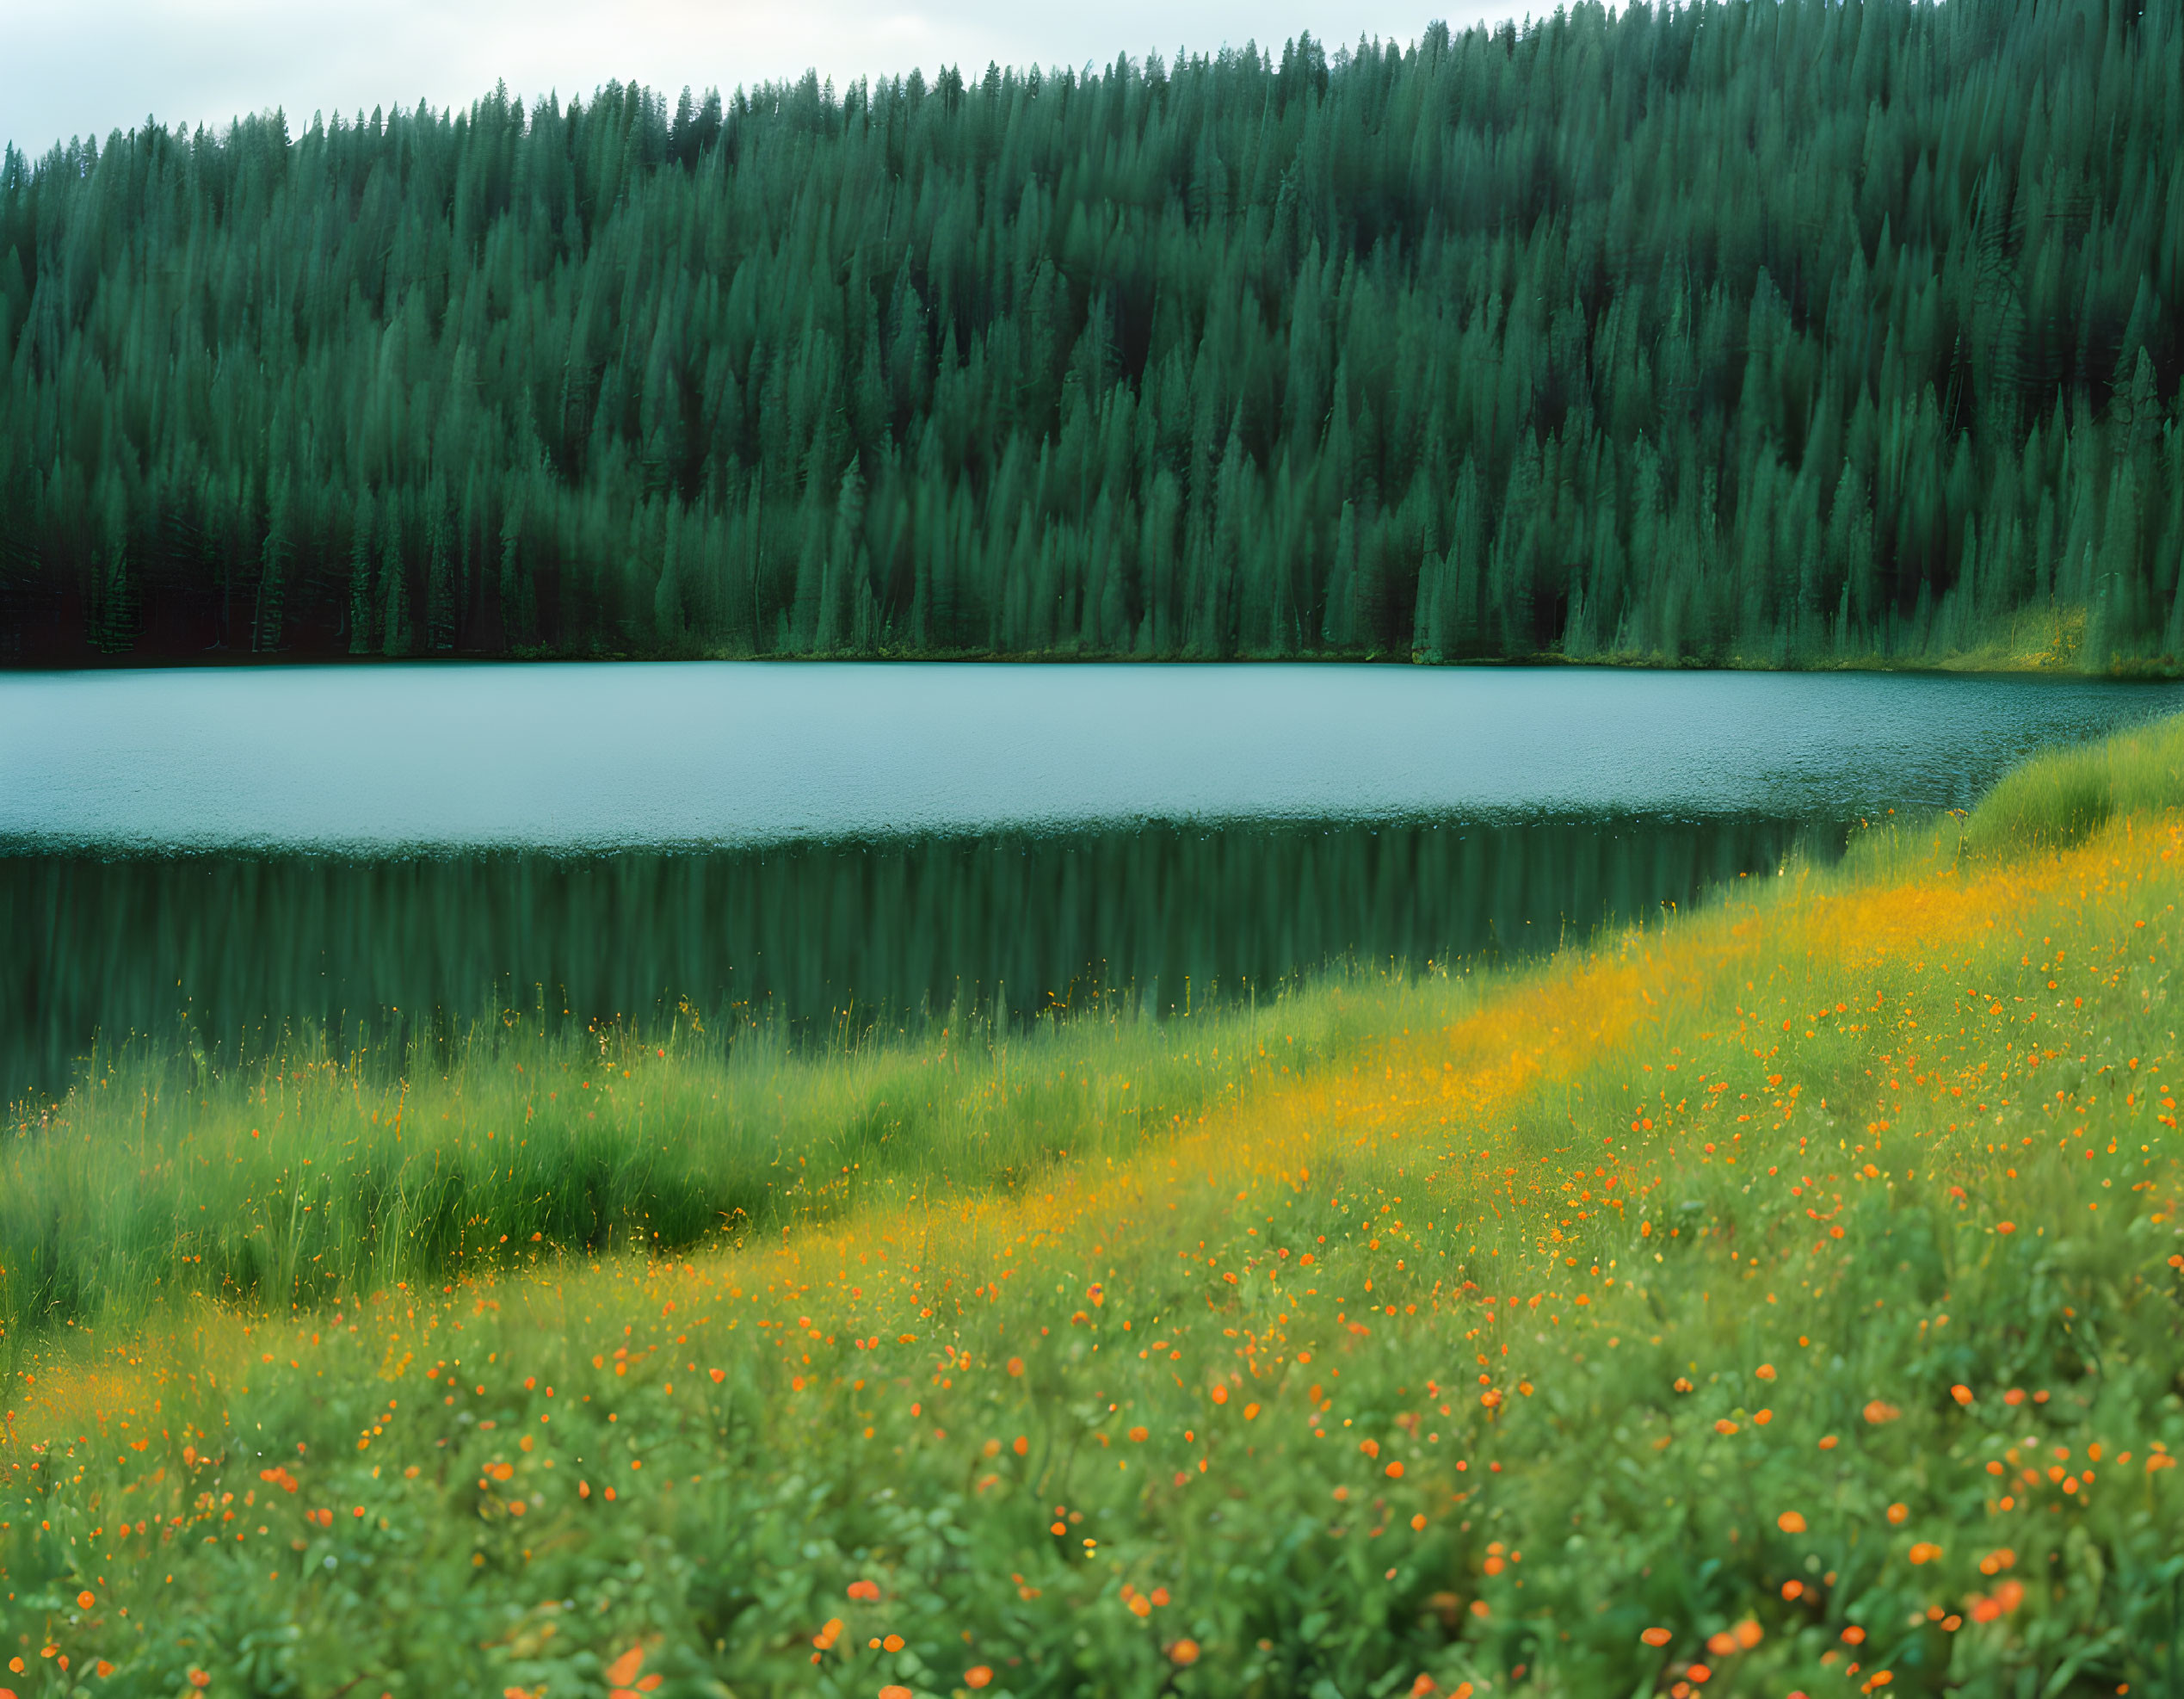 Scenic lake with green forests and yellow wildflowers